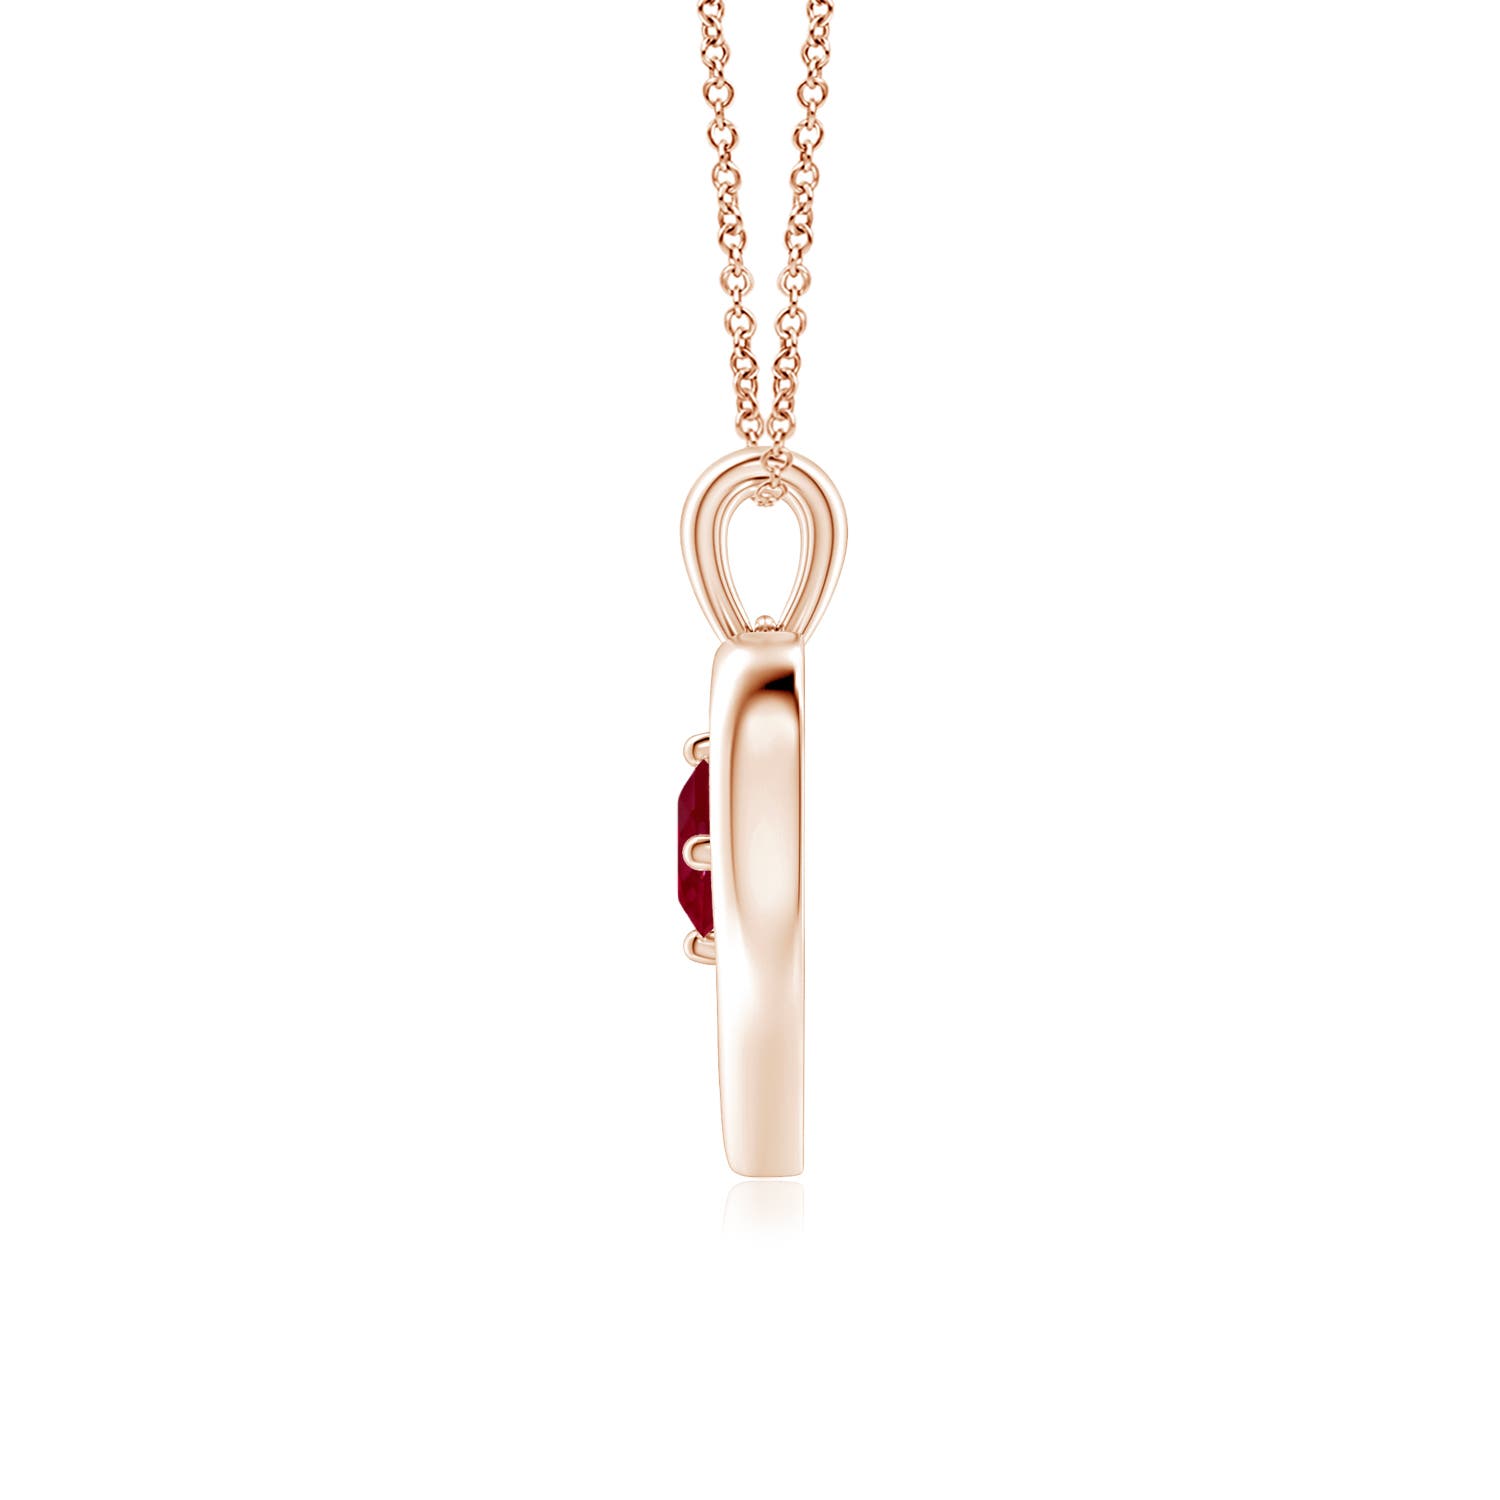 AA - Ruby / 0.34 CT / 14 KT Rose Gold